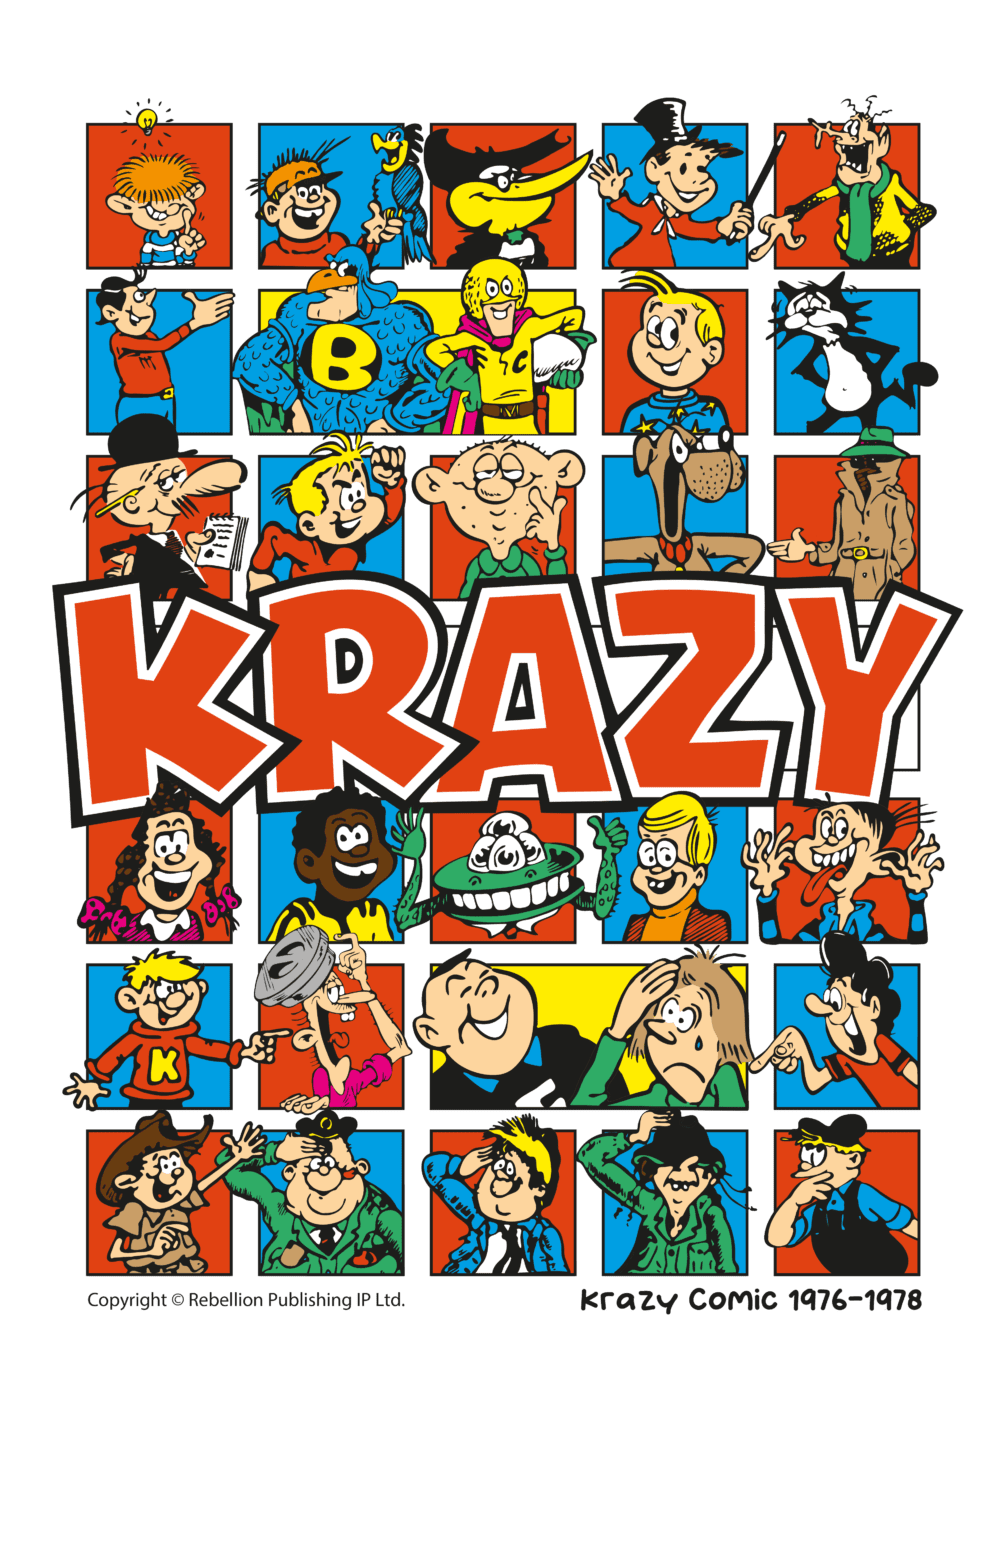 Krazy Comic Characters